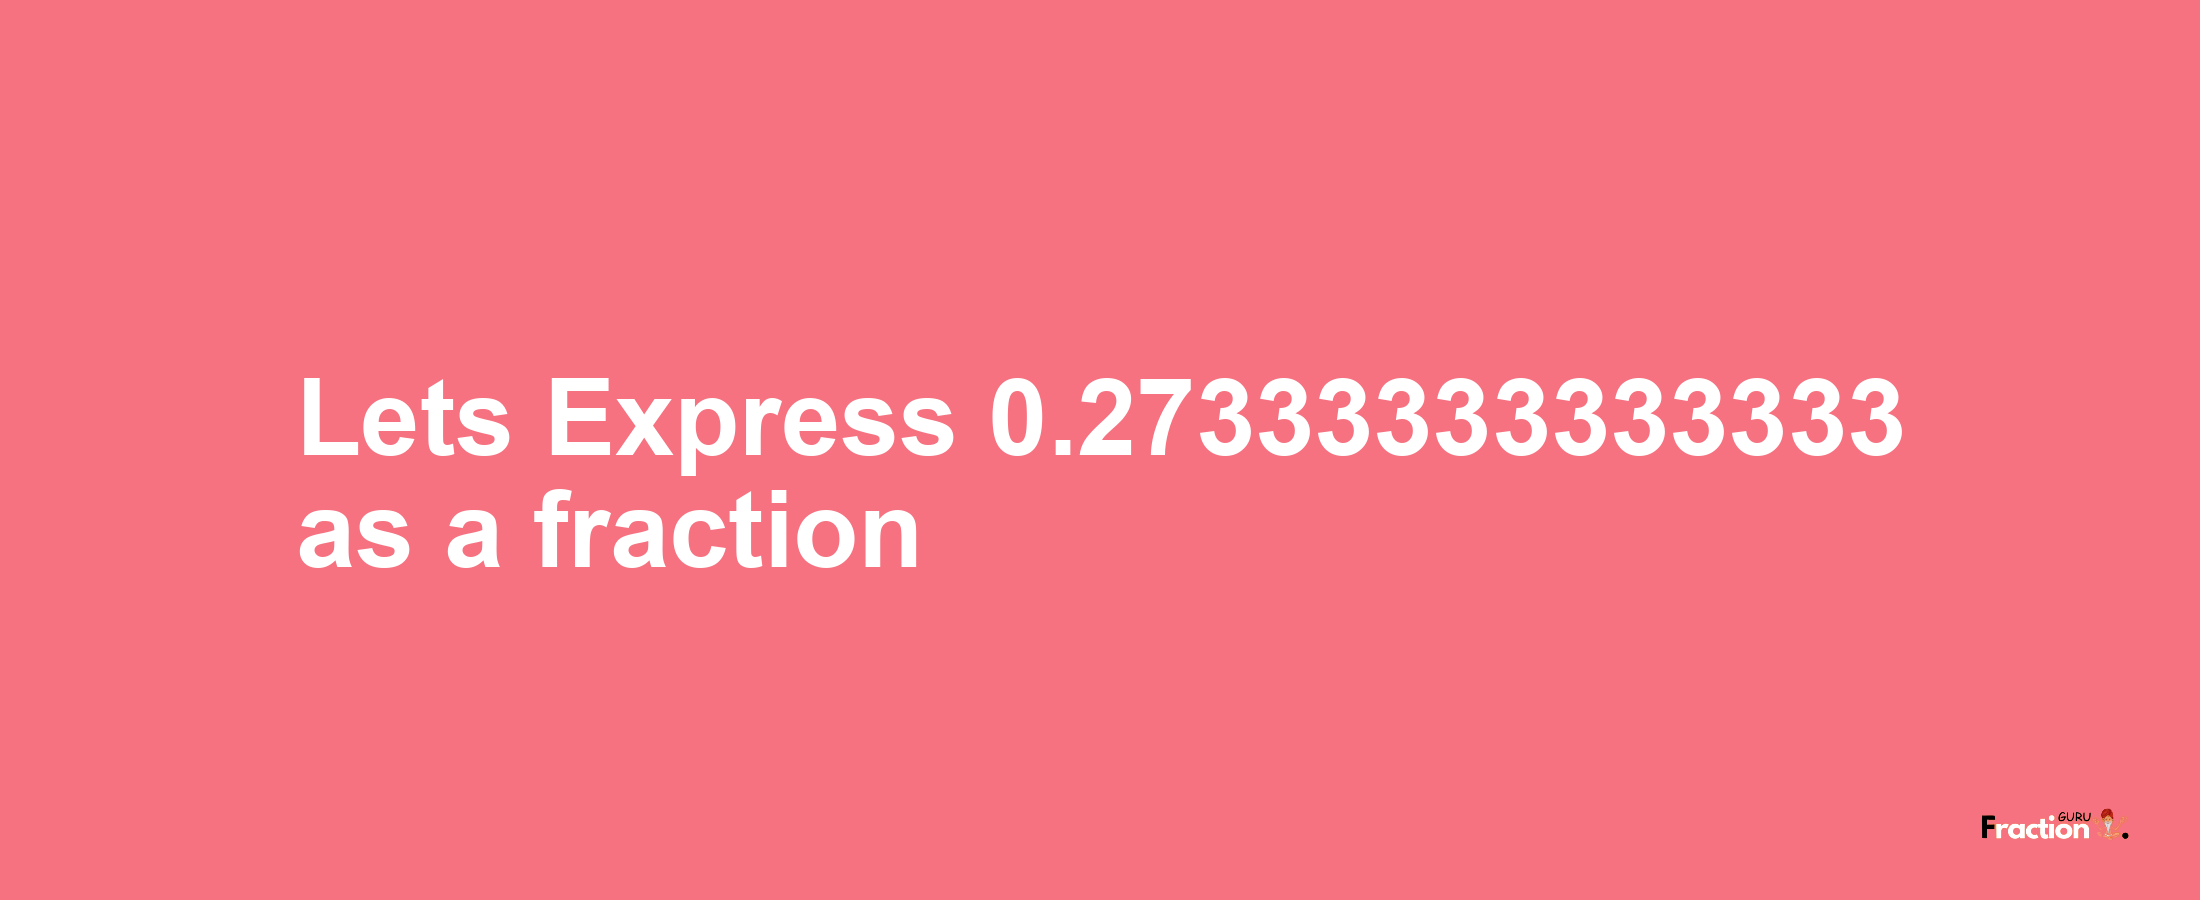 Lets Express 0.27333333333333 as afraction